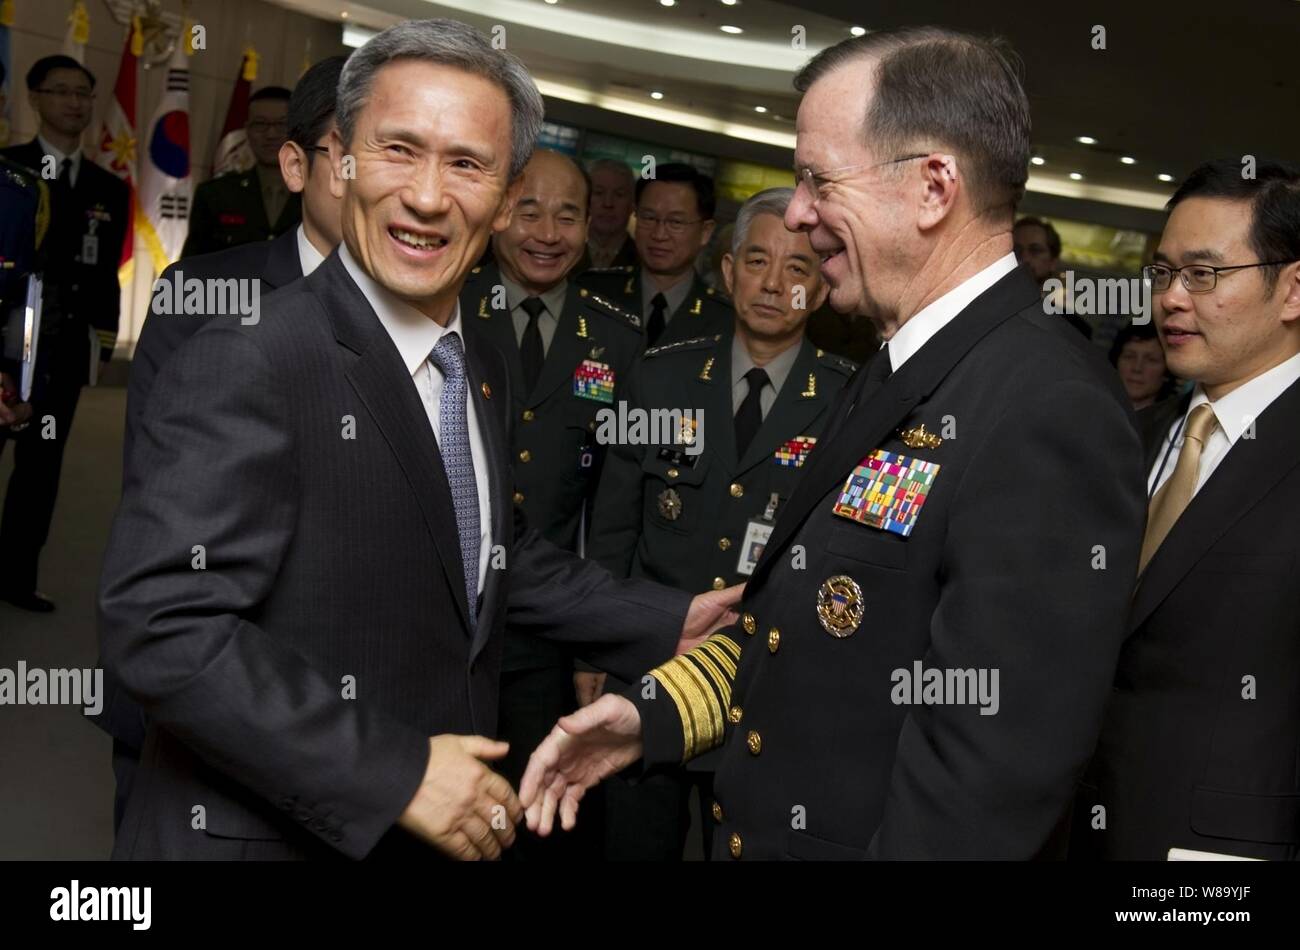 Chairman of the Joint Chiefs of Staff Adm. Mike Mullen, U.S. Navy, is greeted by South Korean Minister of Defense Kim Kwan-jin during meetings in Seoul, Republic of South Korea, on Dec. 8, 2010.  Mullen traveled to Korea to meet with defense officials there reassuring the strength of the U.S.-South Korean alliance in light of recent tensions with the north. Stock Photo